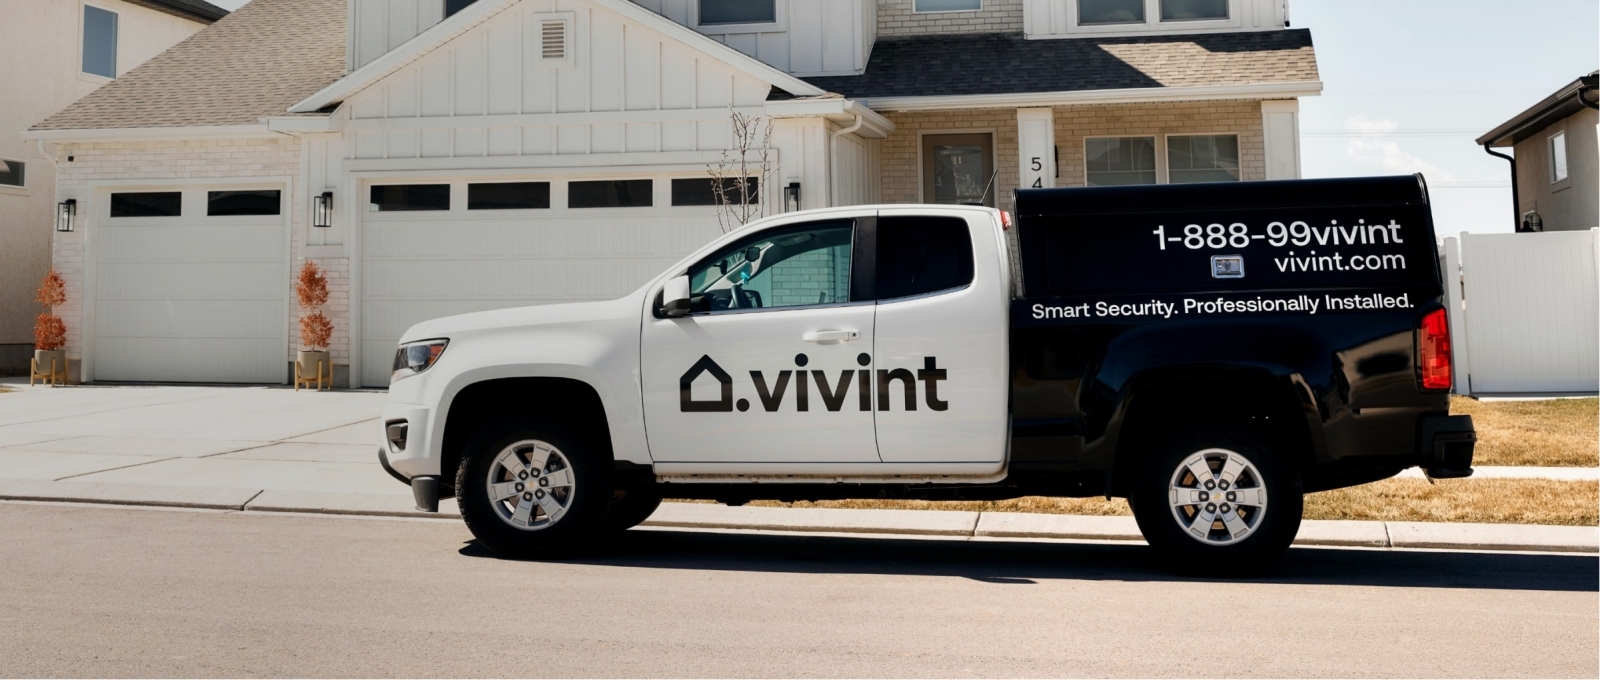 Vivint truck parked in front of a house